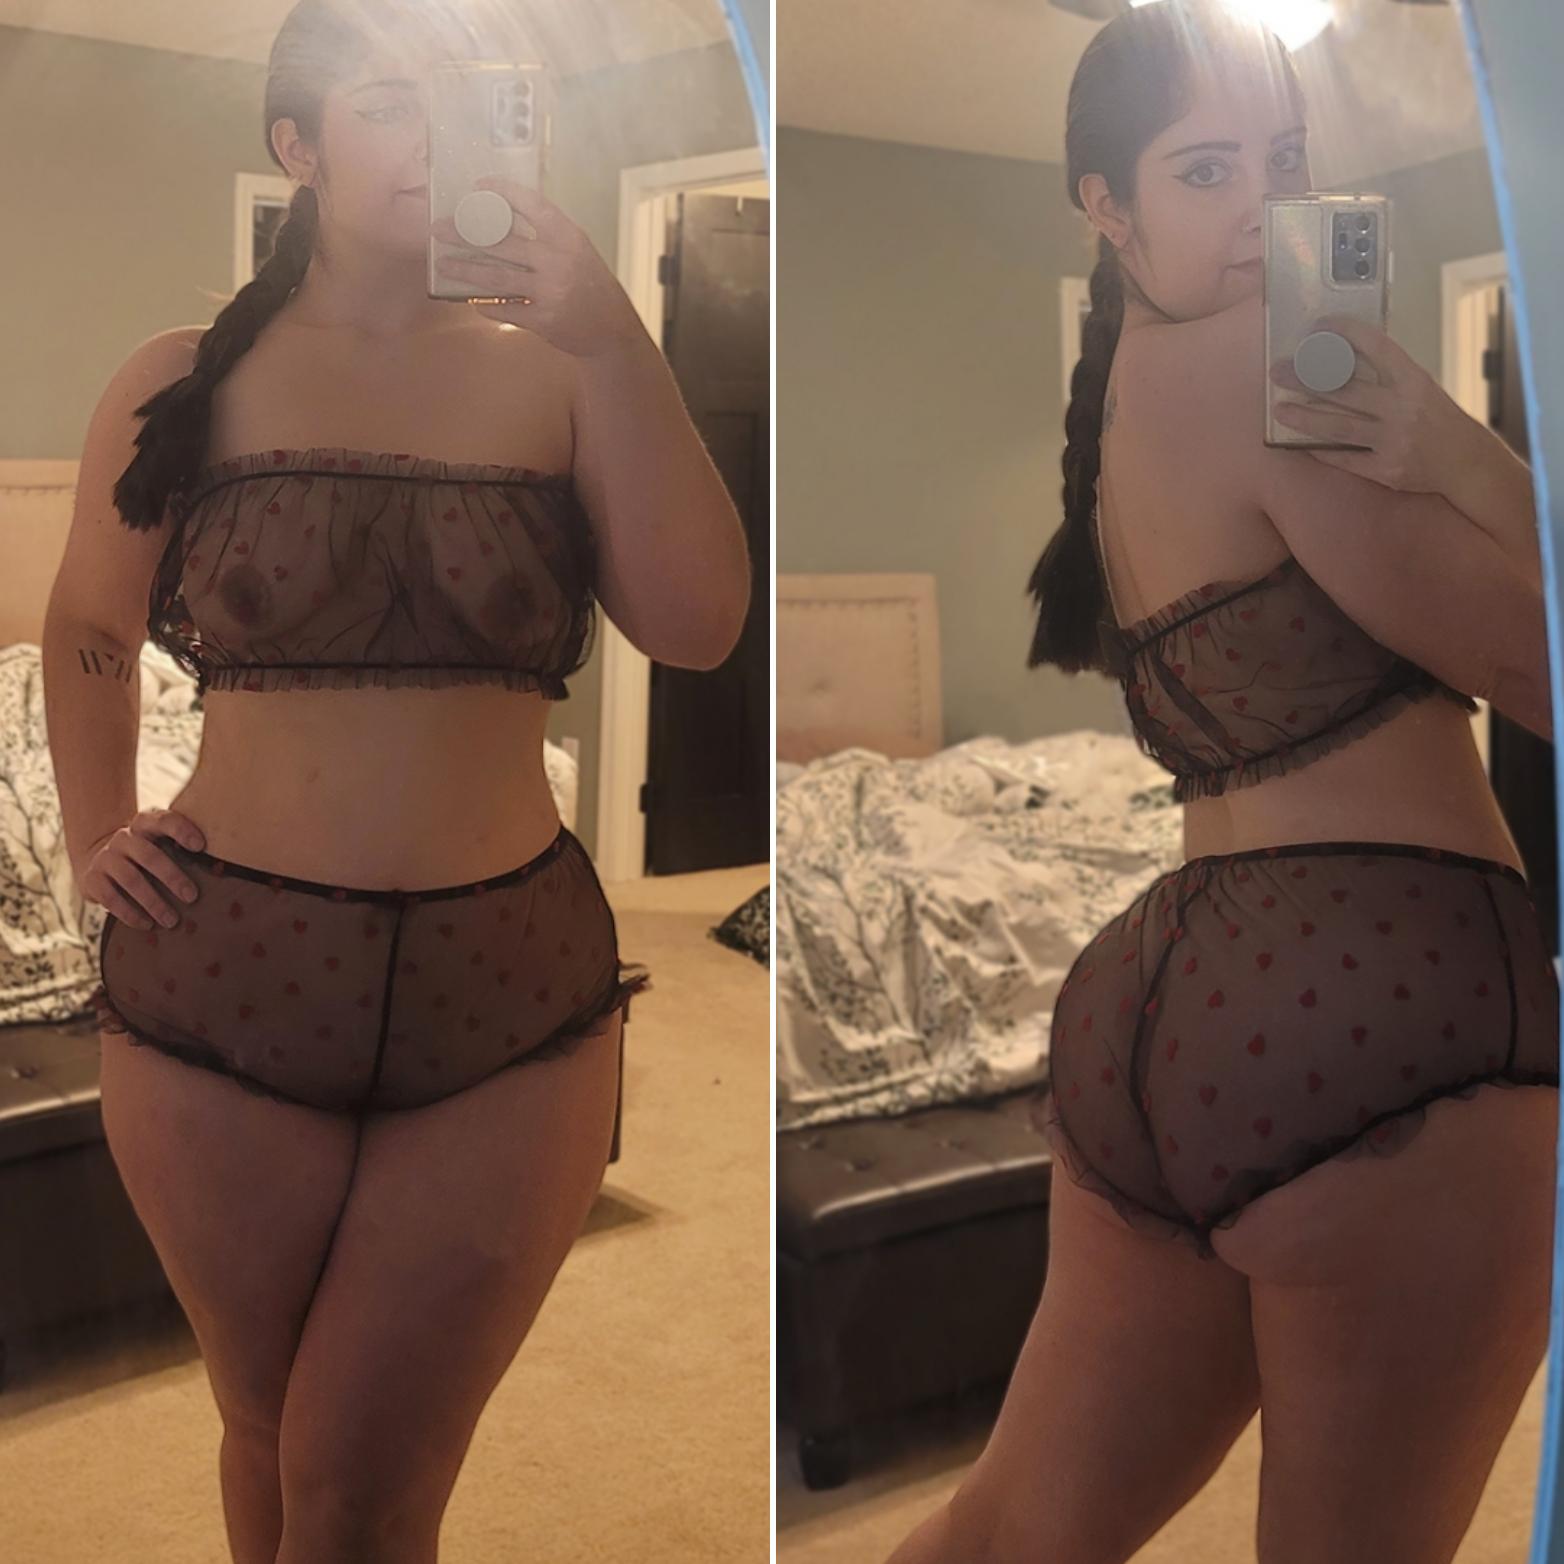 Mirror Selfie Monday with new lingerie